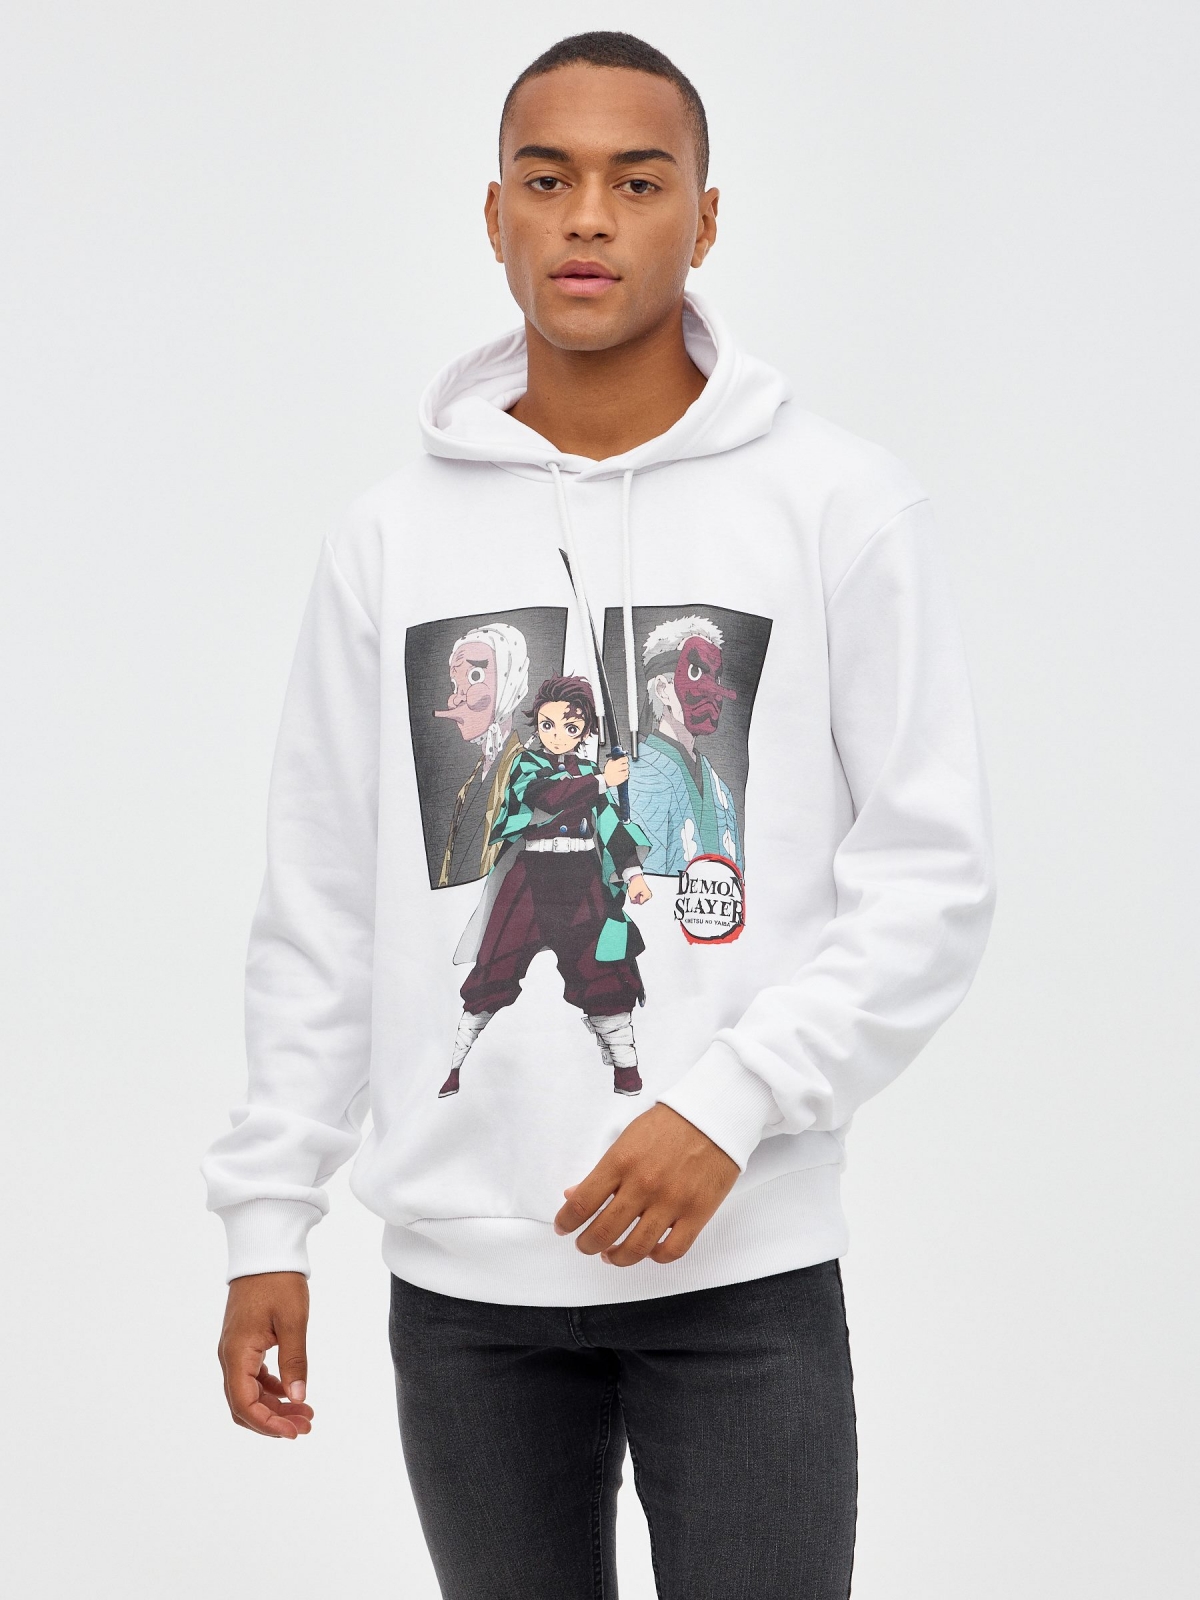 Demon Slayer licensed sweatshirt white middle front view